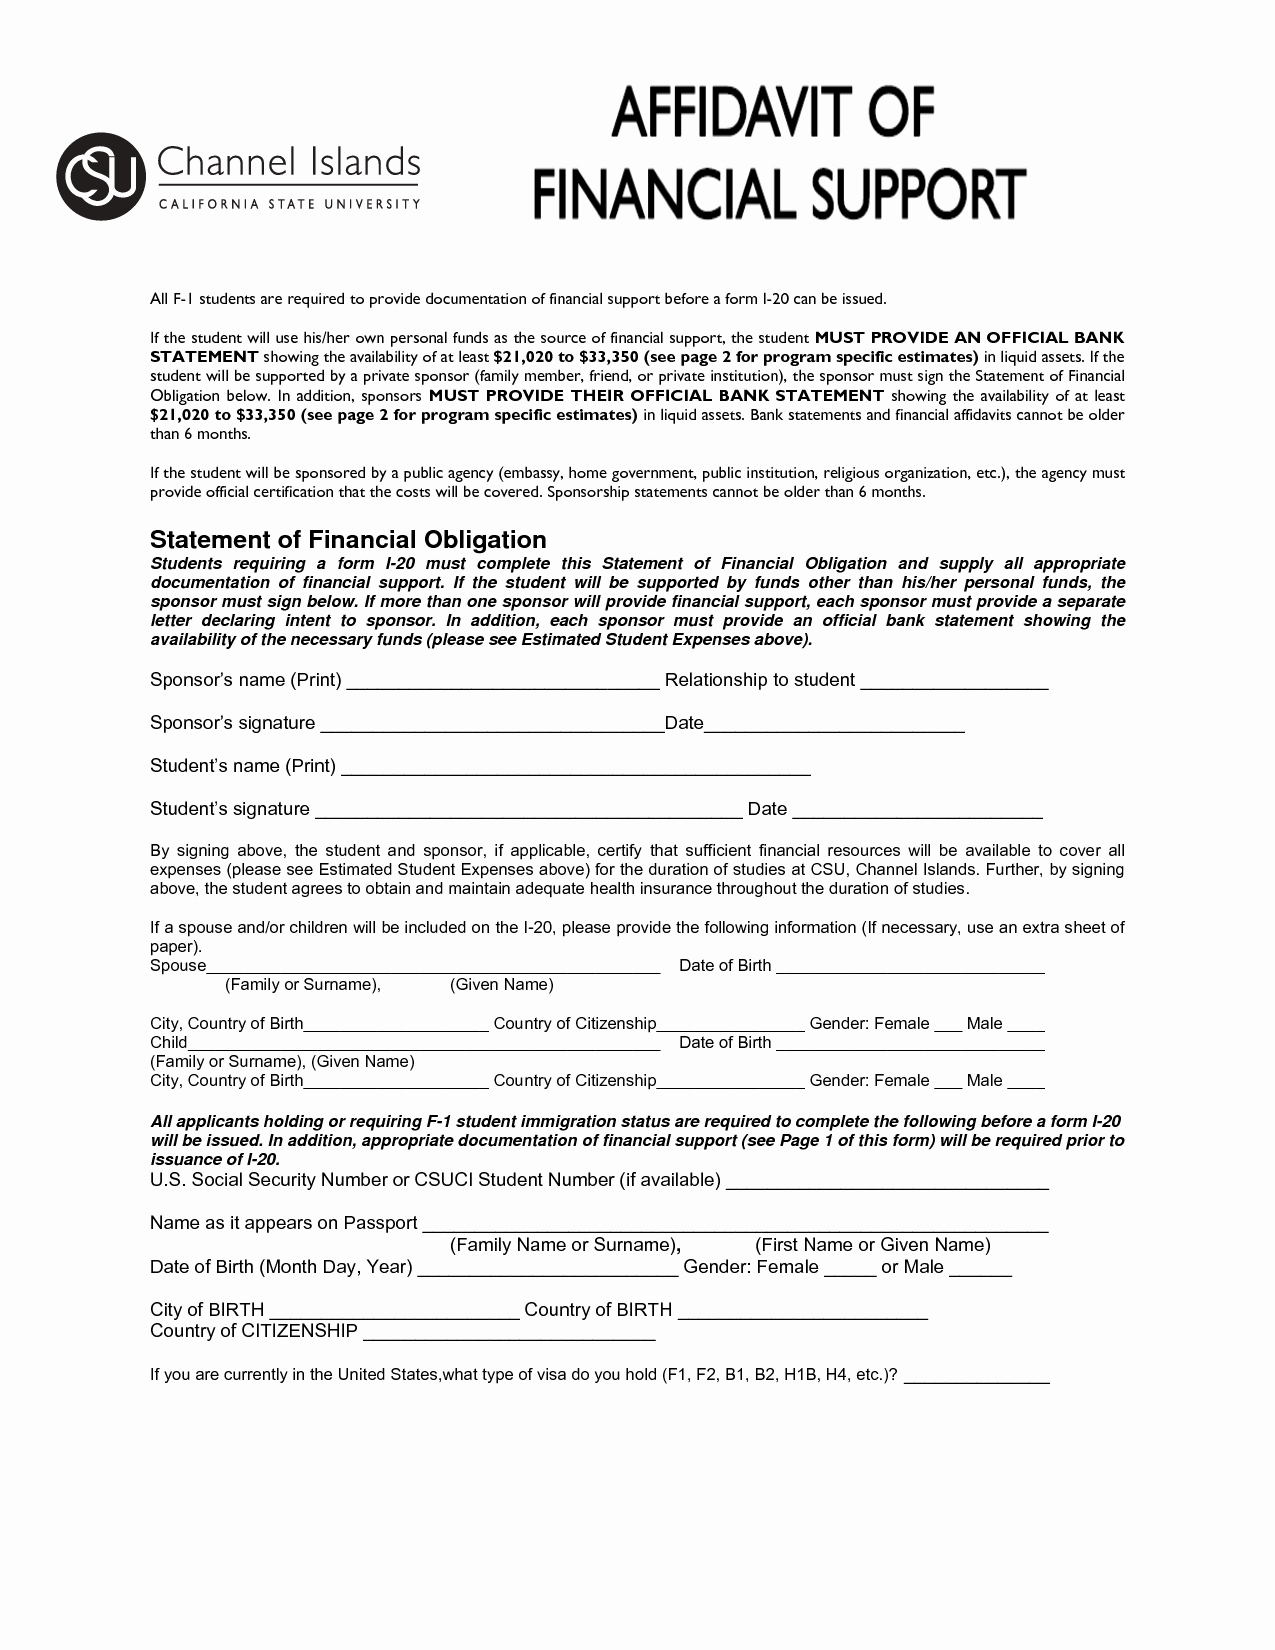 Letter Of Financial Support Template Luxury Search Results Affidavit Of Financial Support Letter